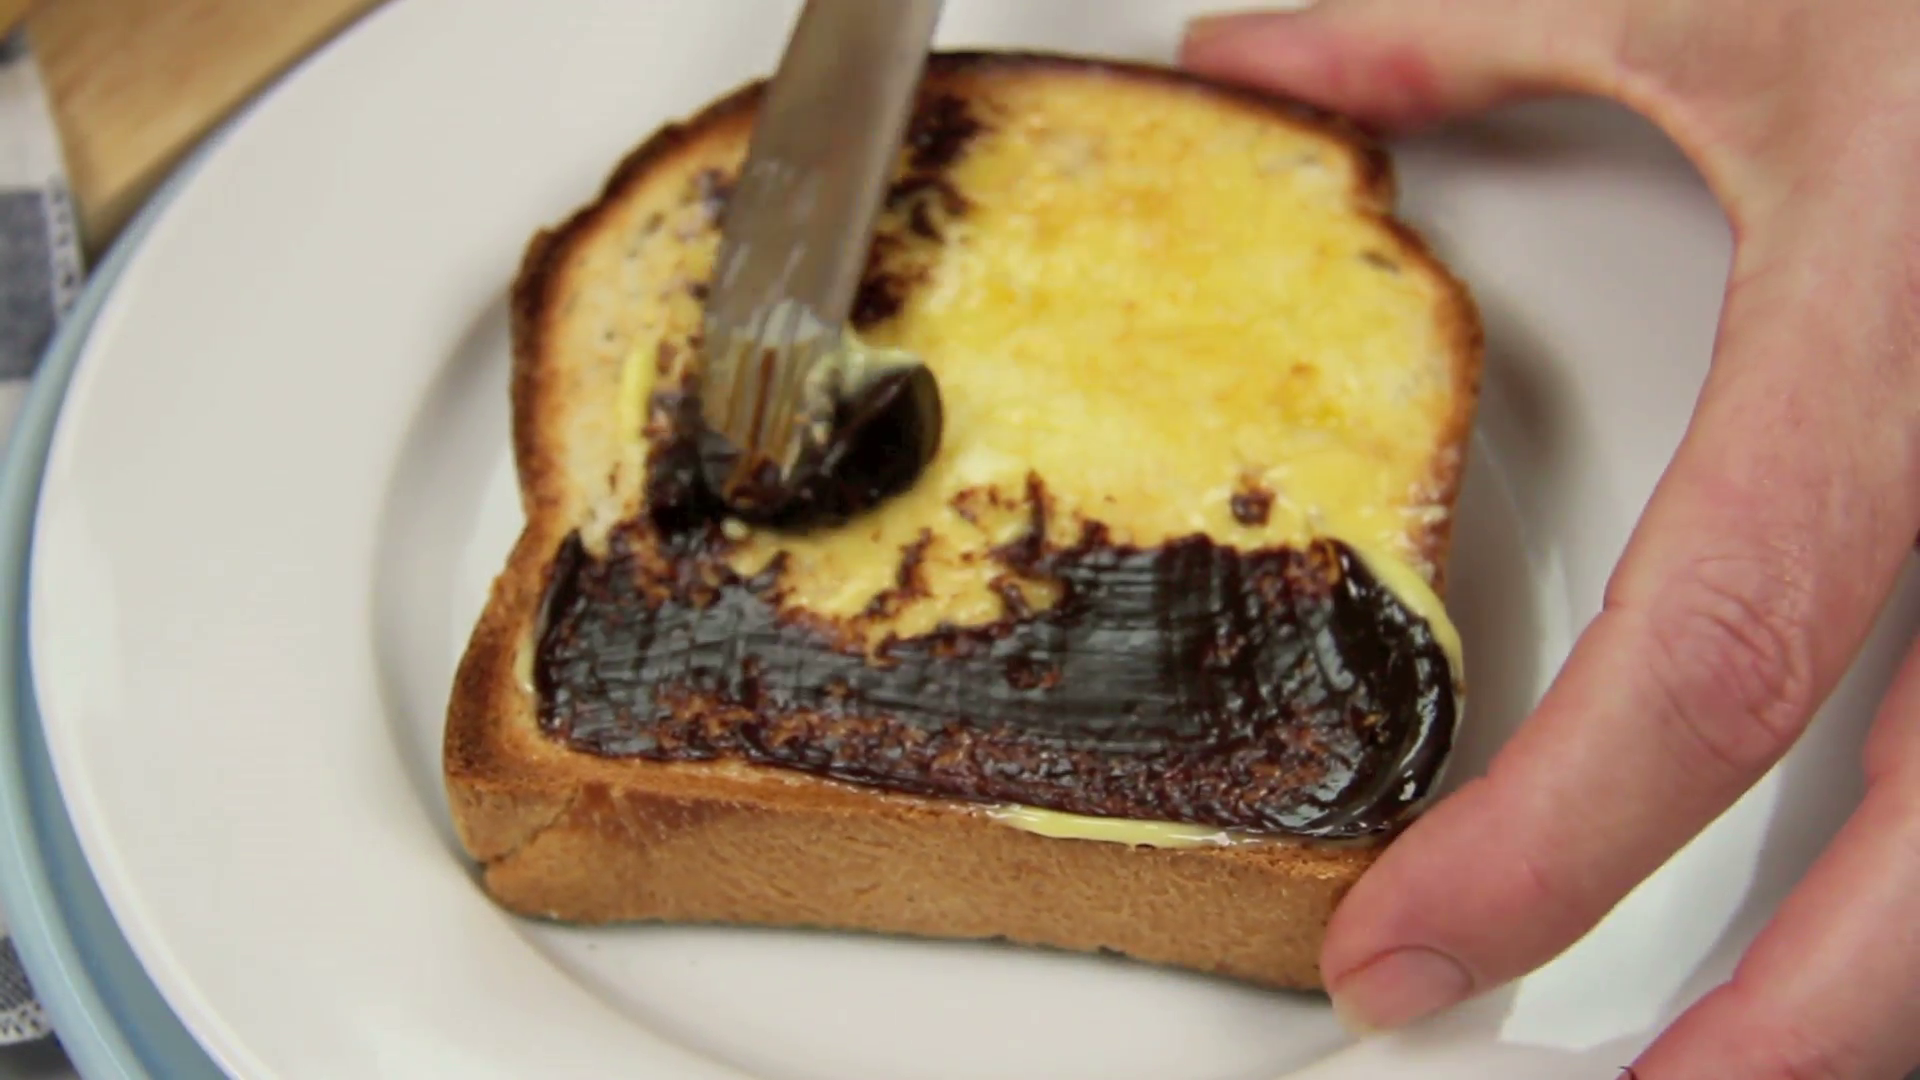 Vegemite being spread on to melted butter on a hot toast slice ...